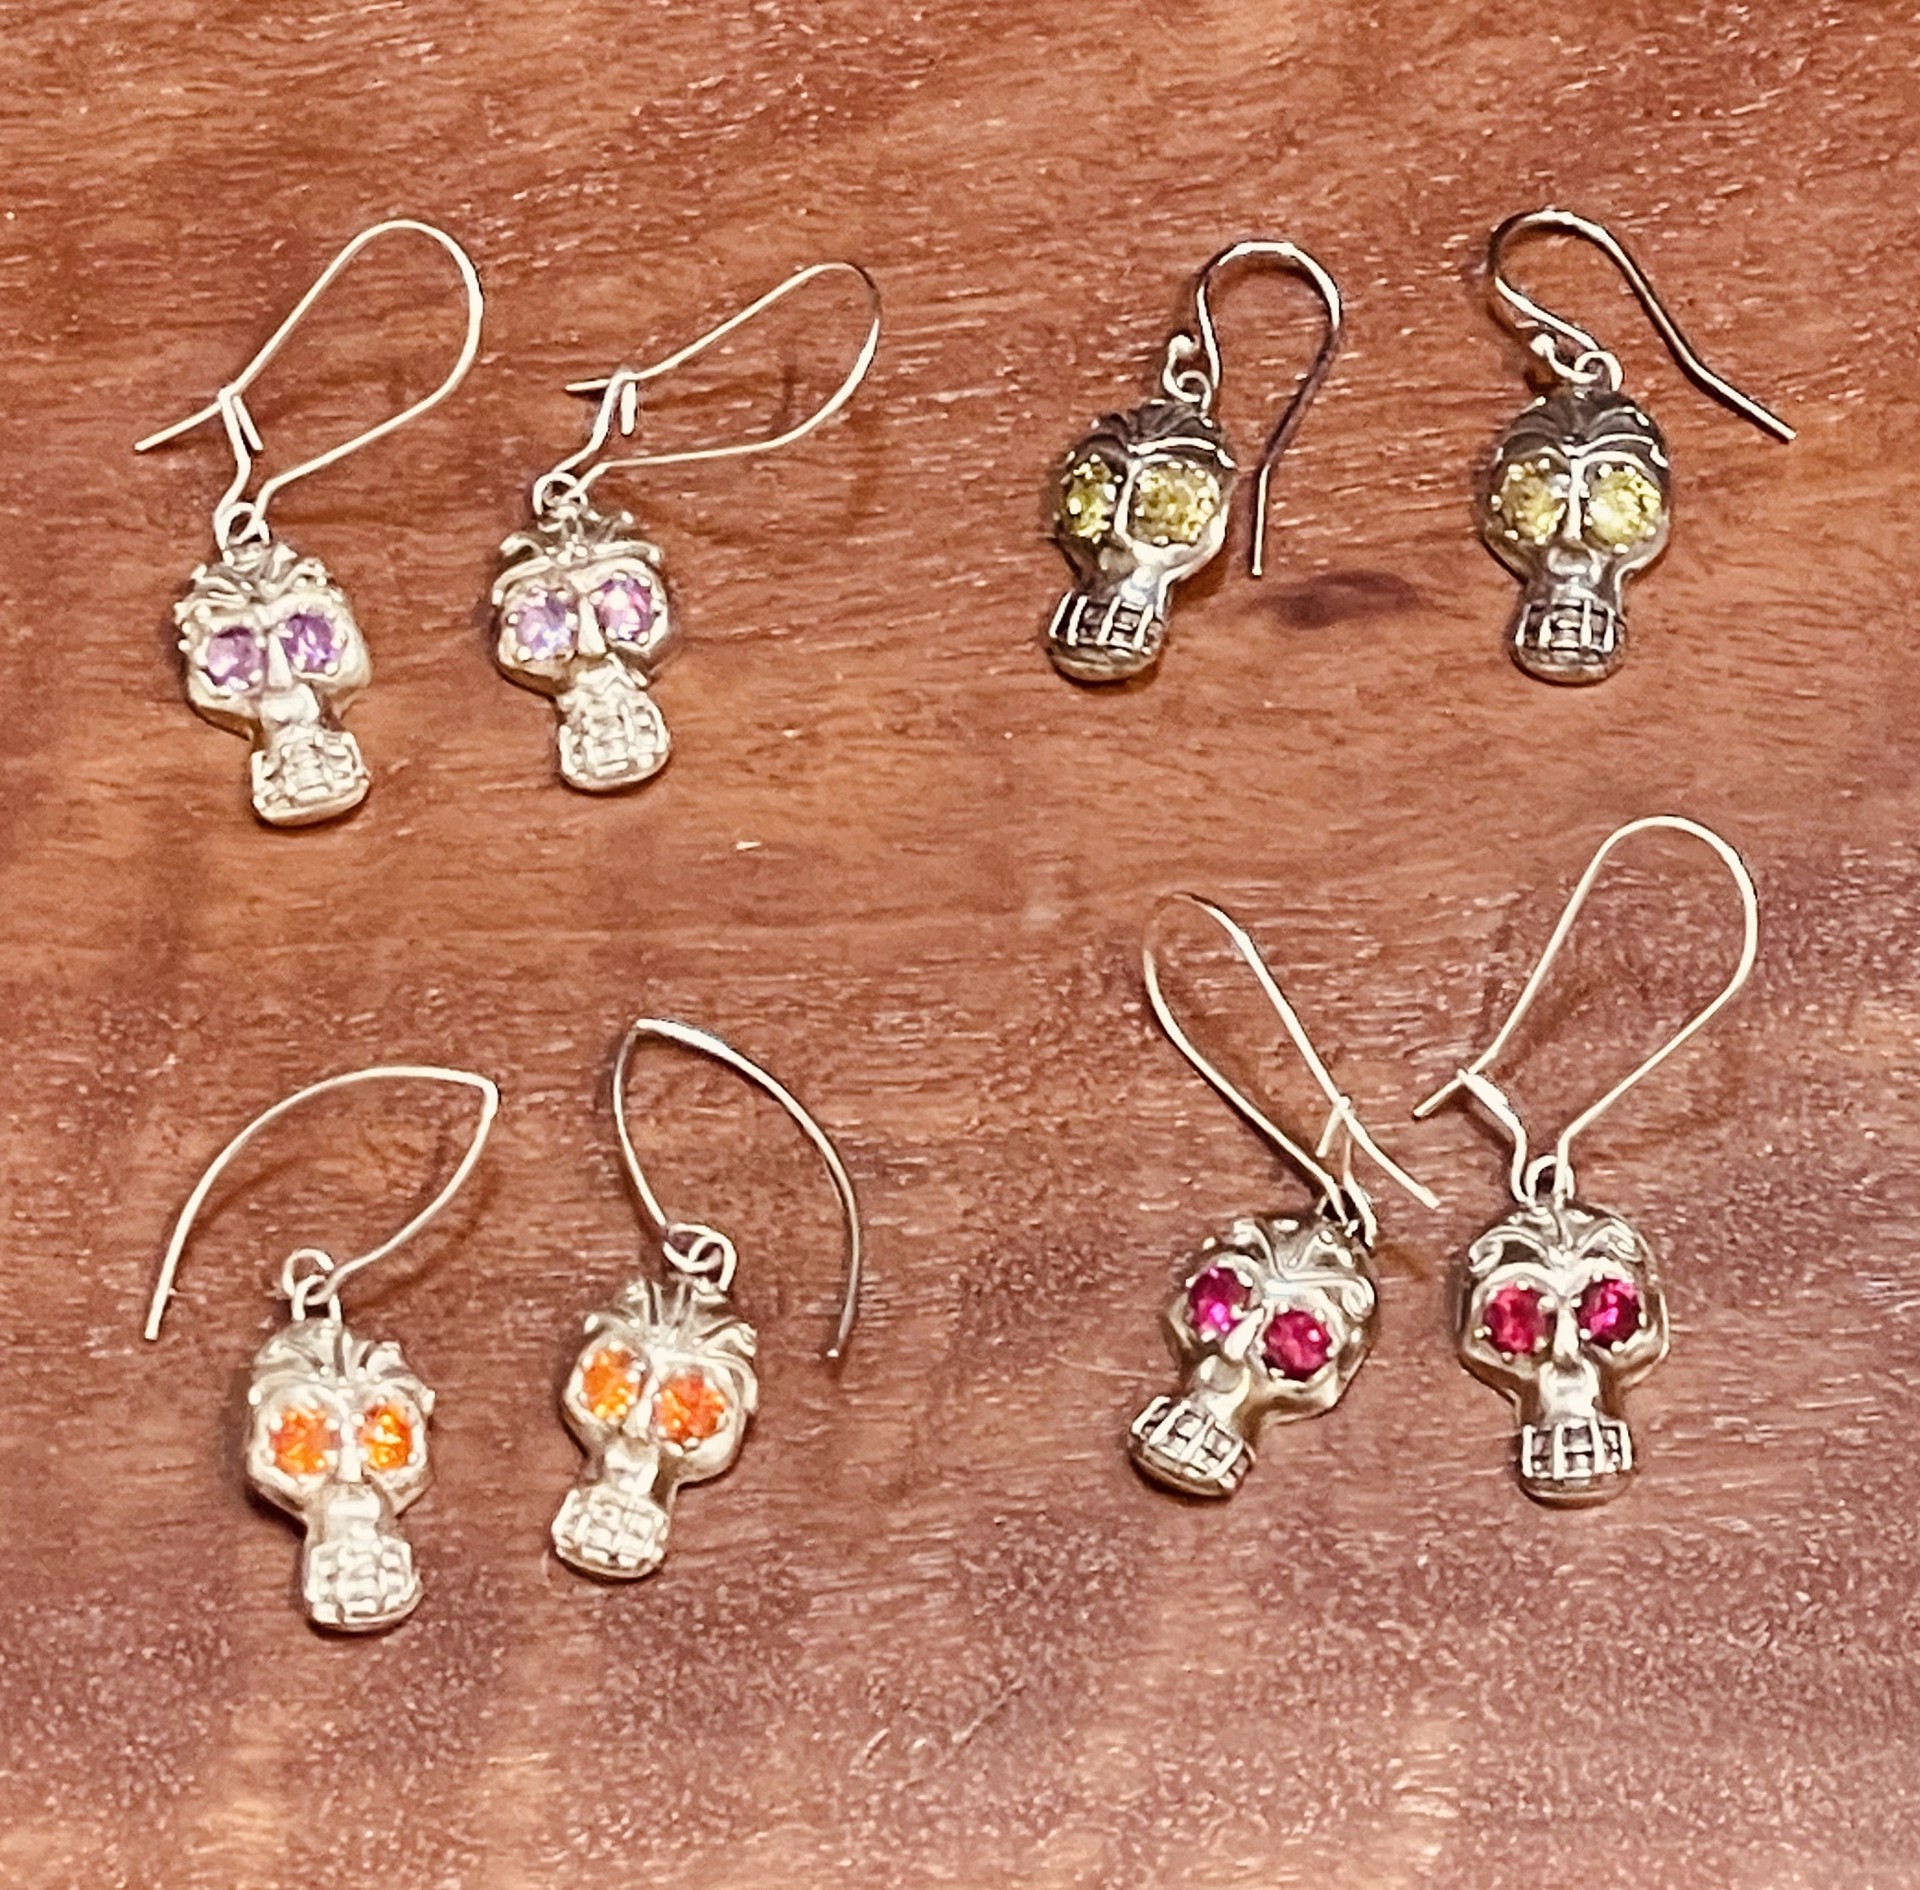 Earrings - Calavedas In Fine Silverf With CZ Eyes - Assorted Colors by Carrie Barcom